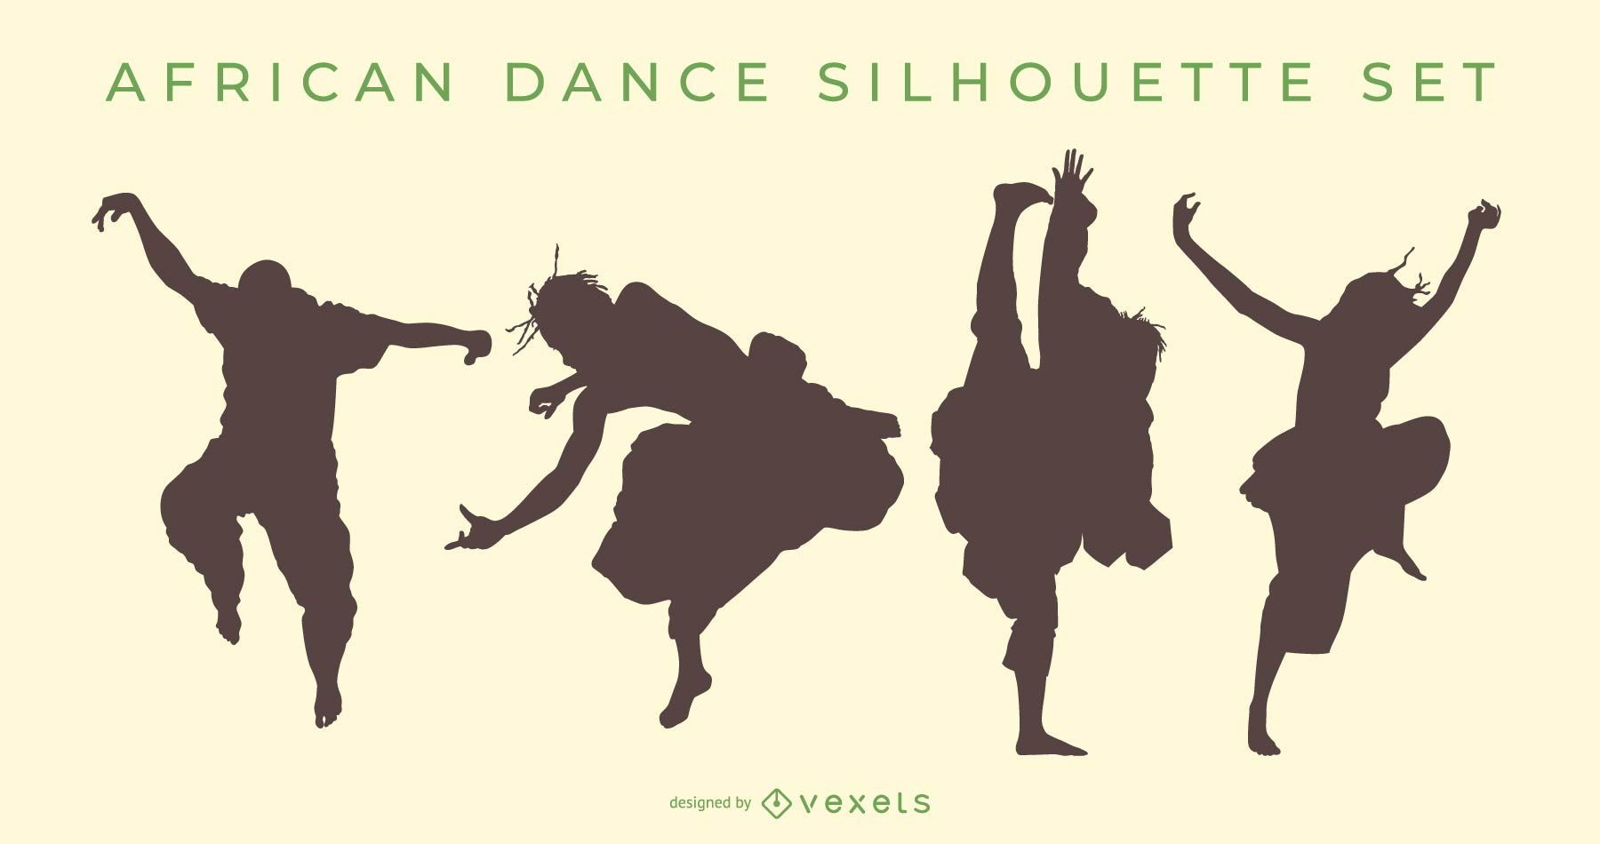 African Dance Silhouette Set